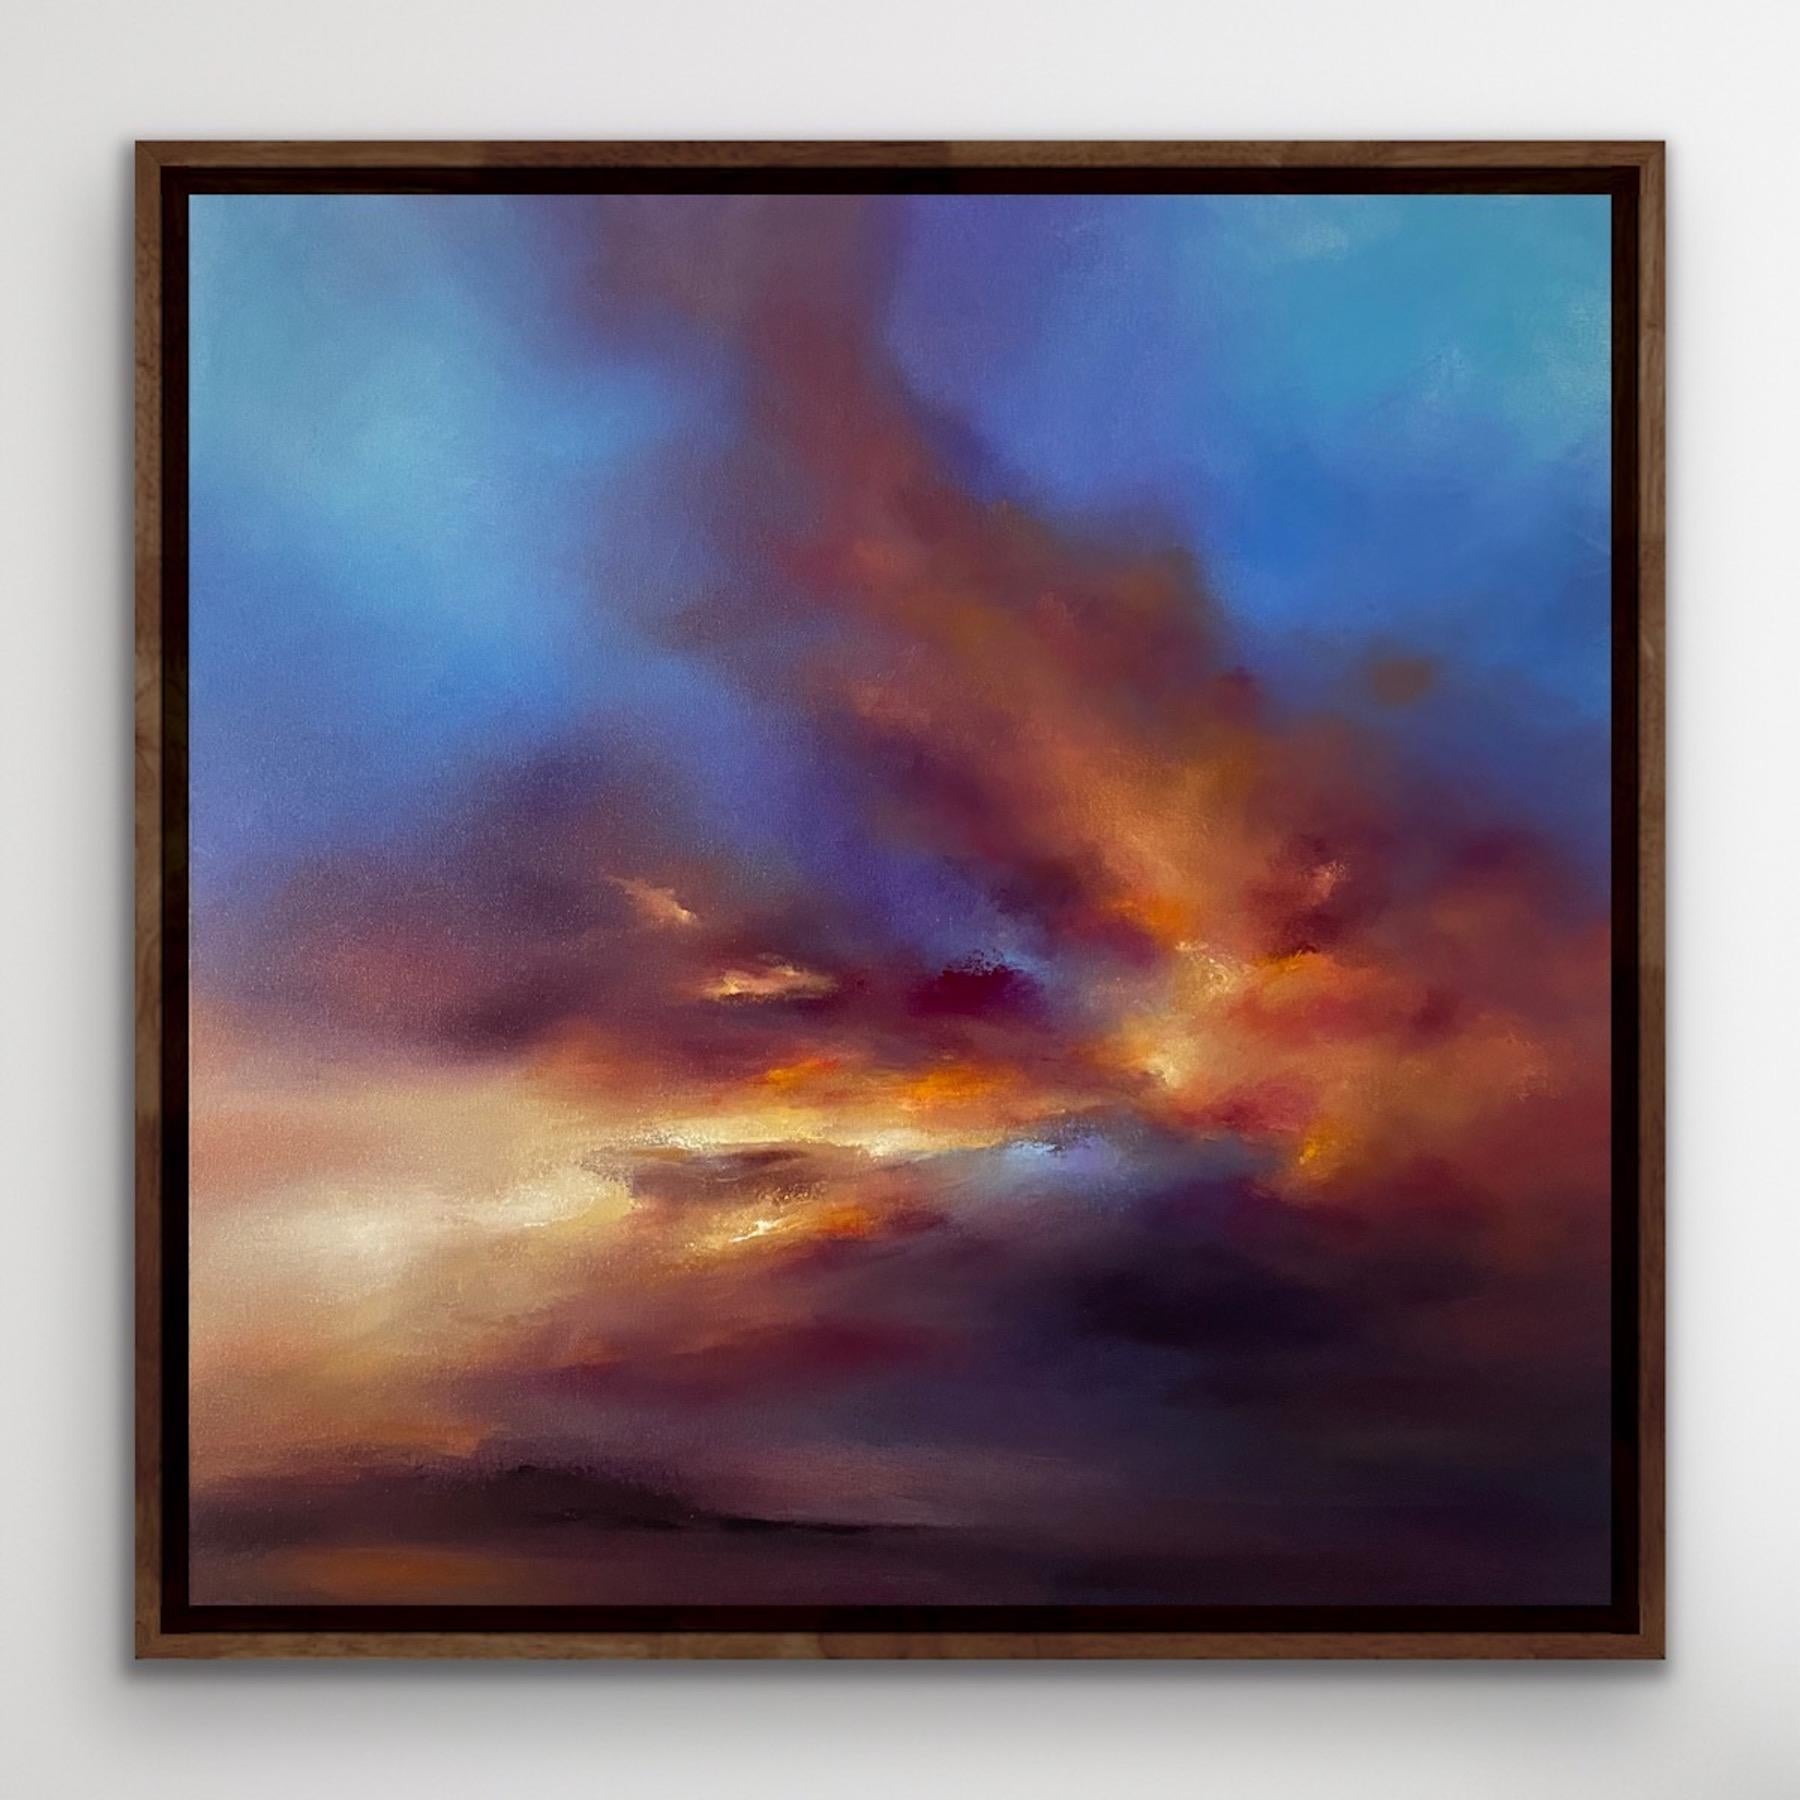 Lighting up Dusk By Laura Dunmow [2021]
Please note that insitu images are purely an indication of how a piece may look

A celebration of the summer solstice. Inspired by the early hot months of May when the evening skies were hot and colours